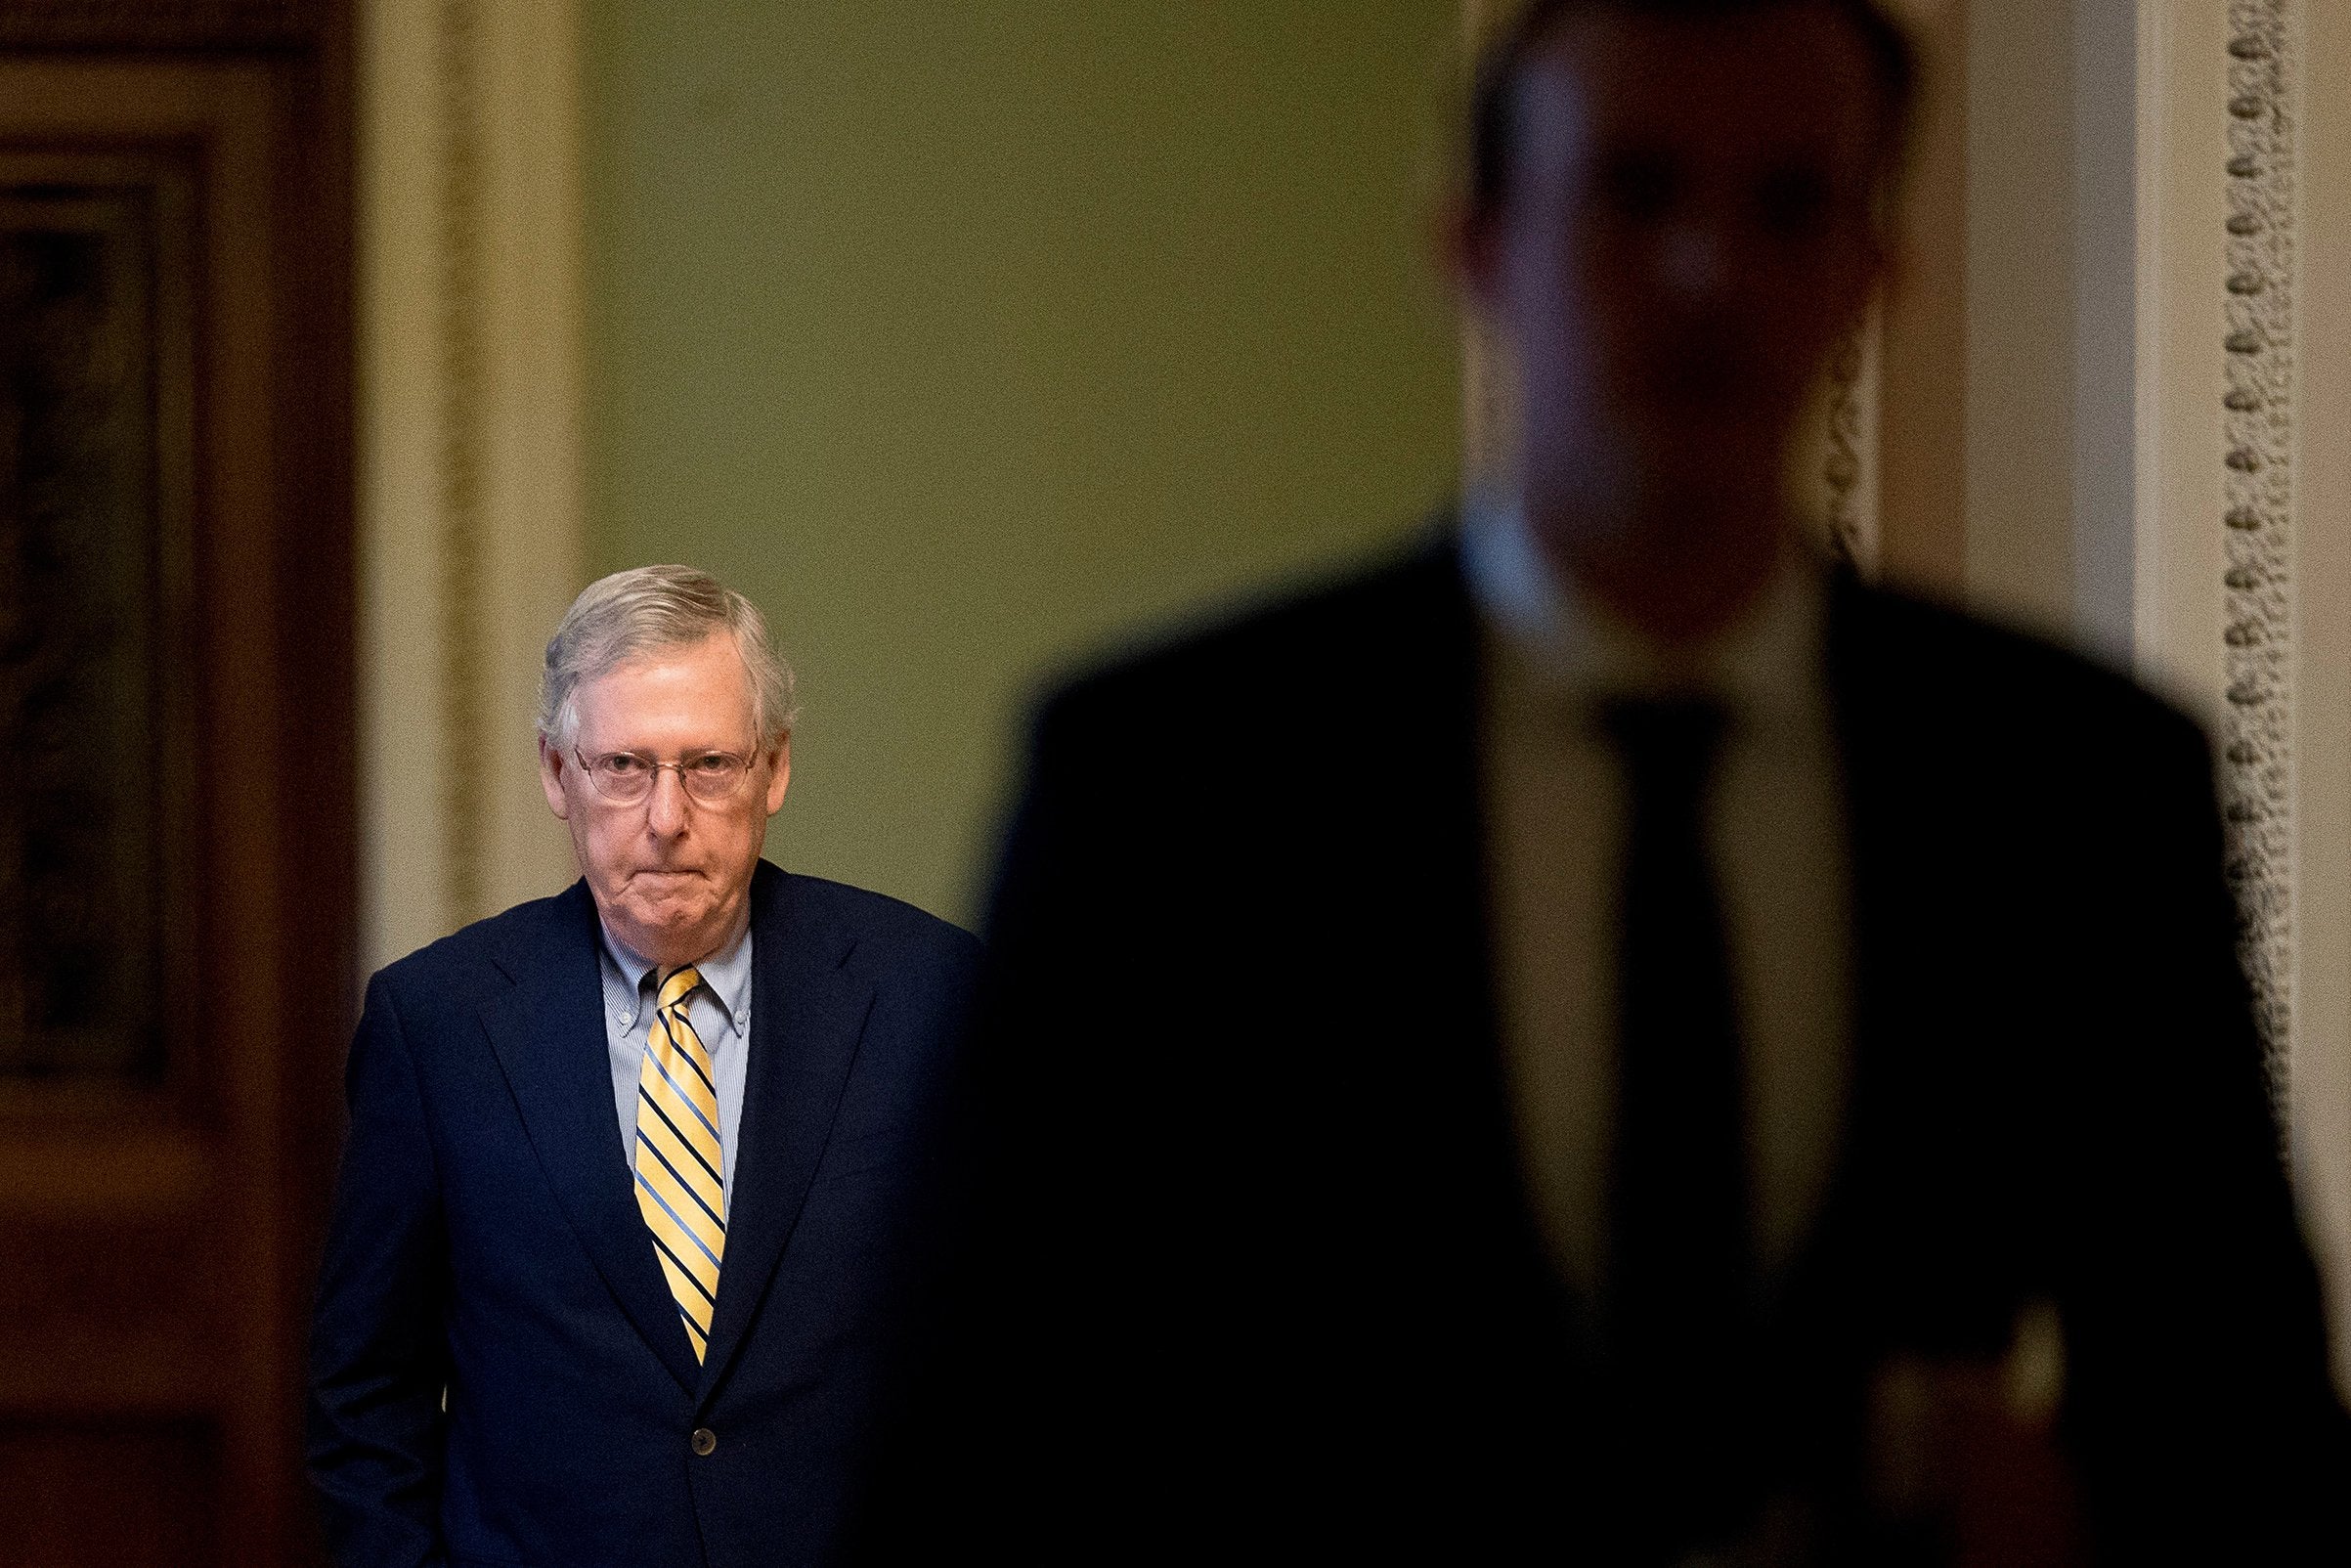 The Health Care Bill’s Collapse Leaves A Divided GOP At The Crossroads